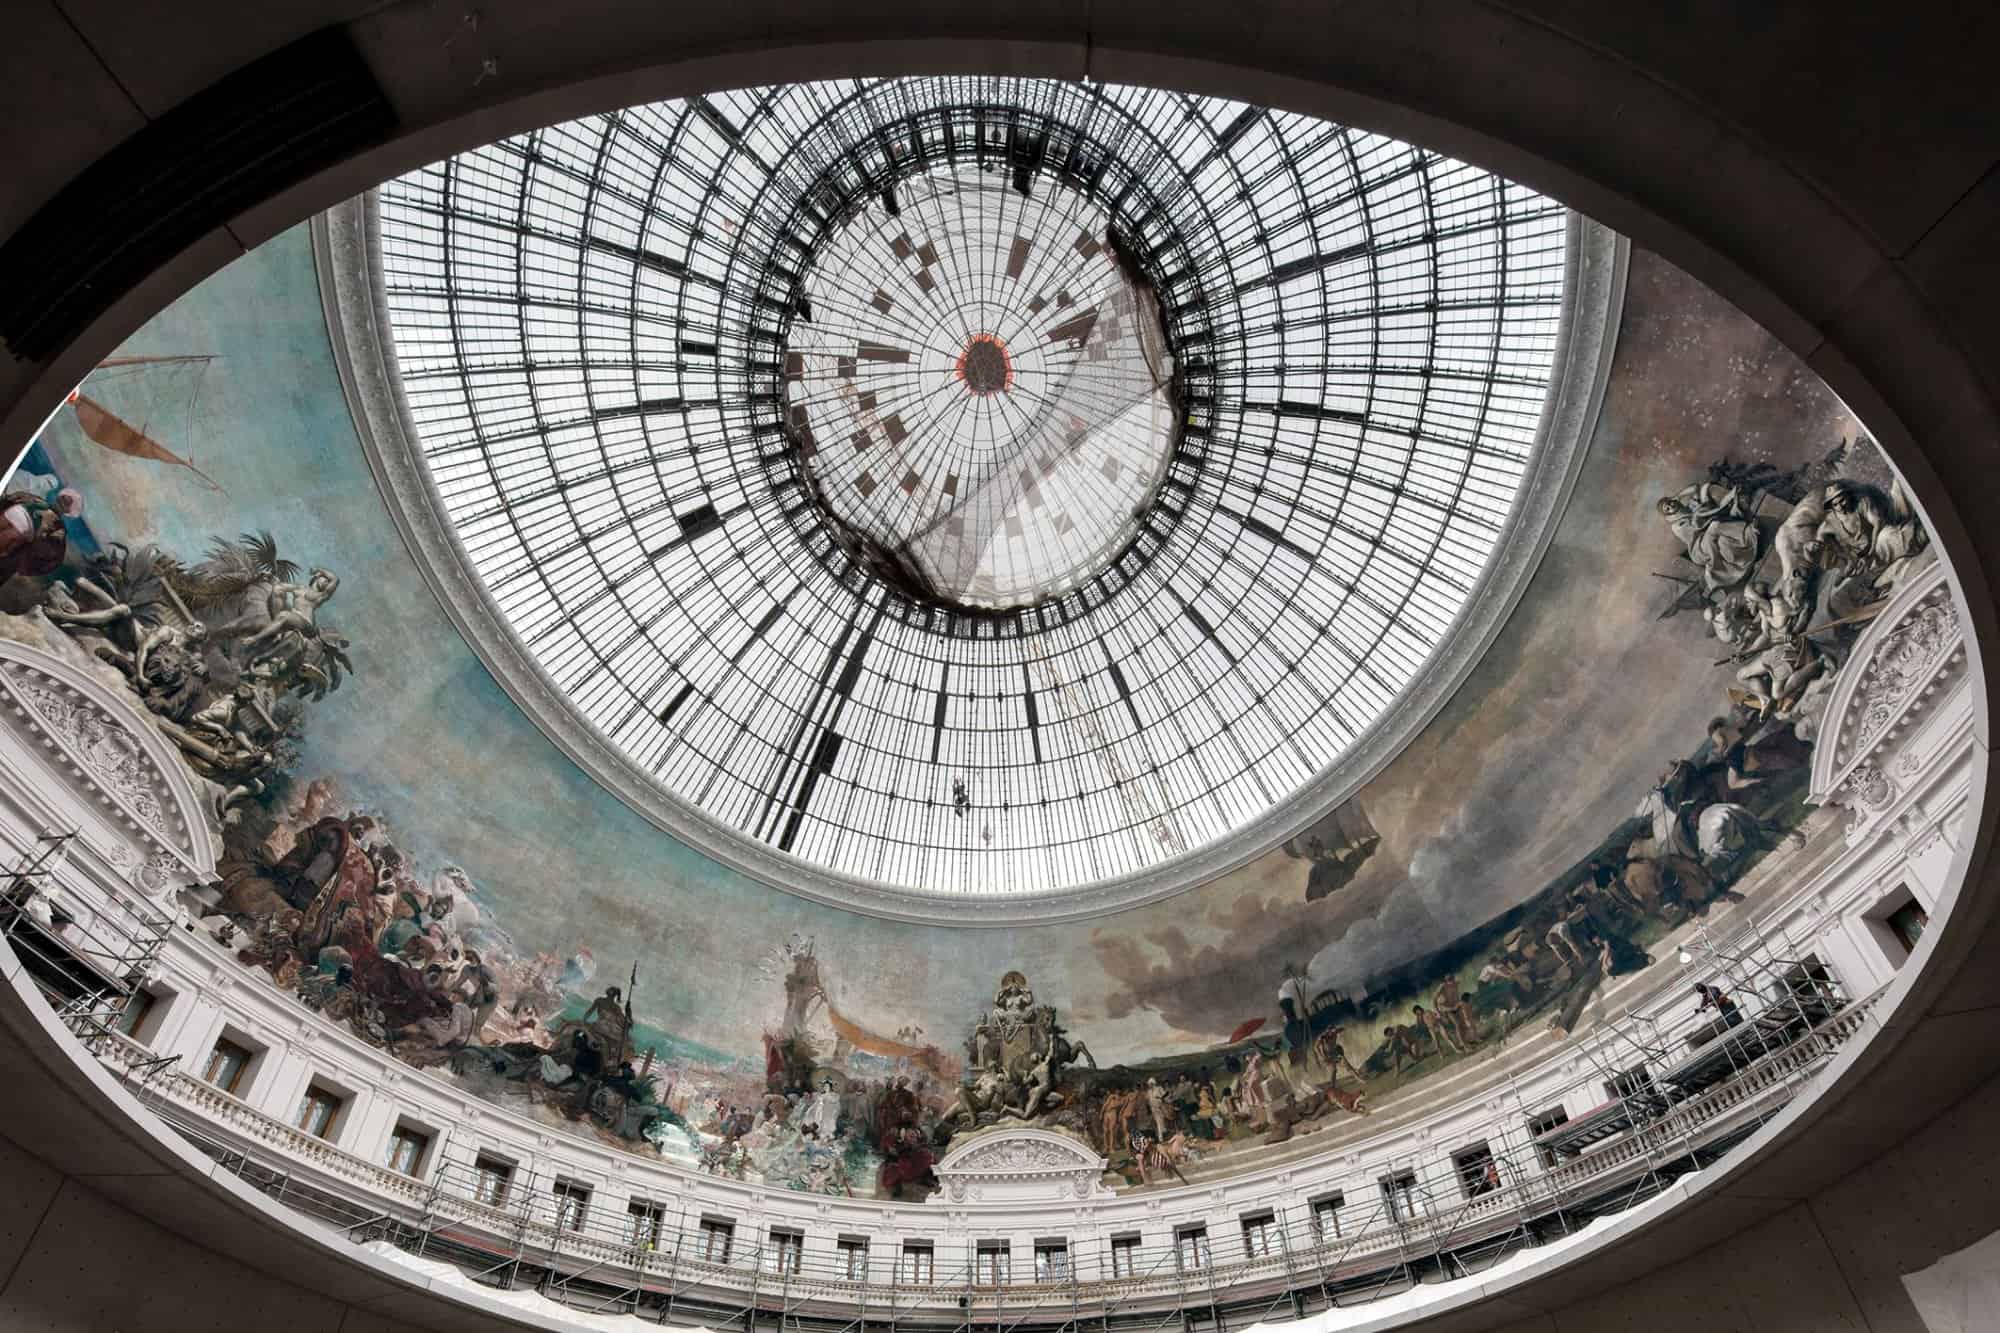 A large dome ceiling made of glass. There is a large mural below the glass ceiling. There are white walls under the mural with scaffolding, and there is a net on the glass ceiling for construction work